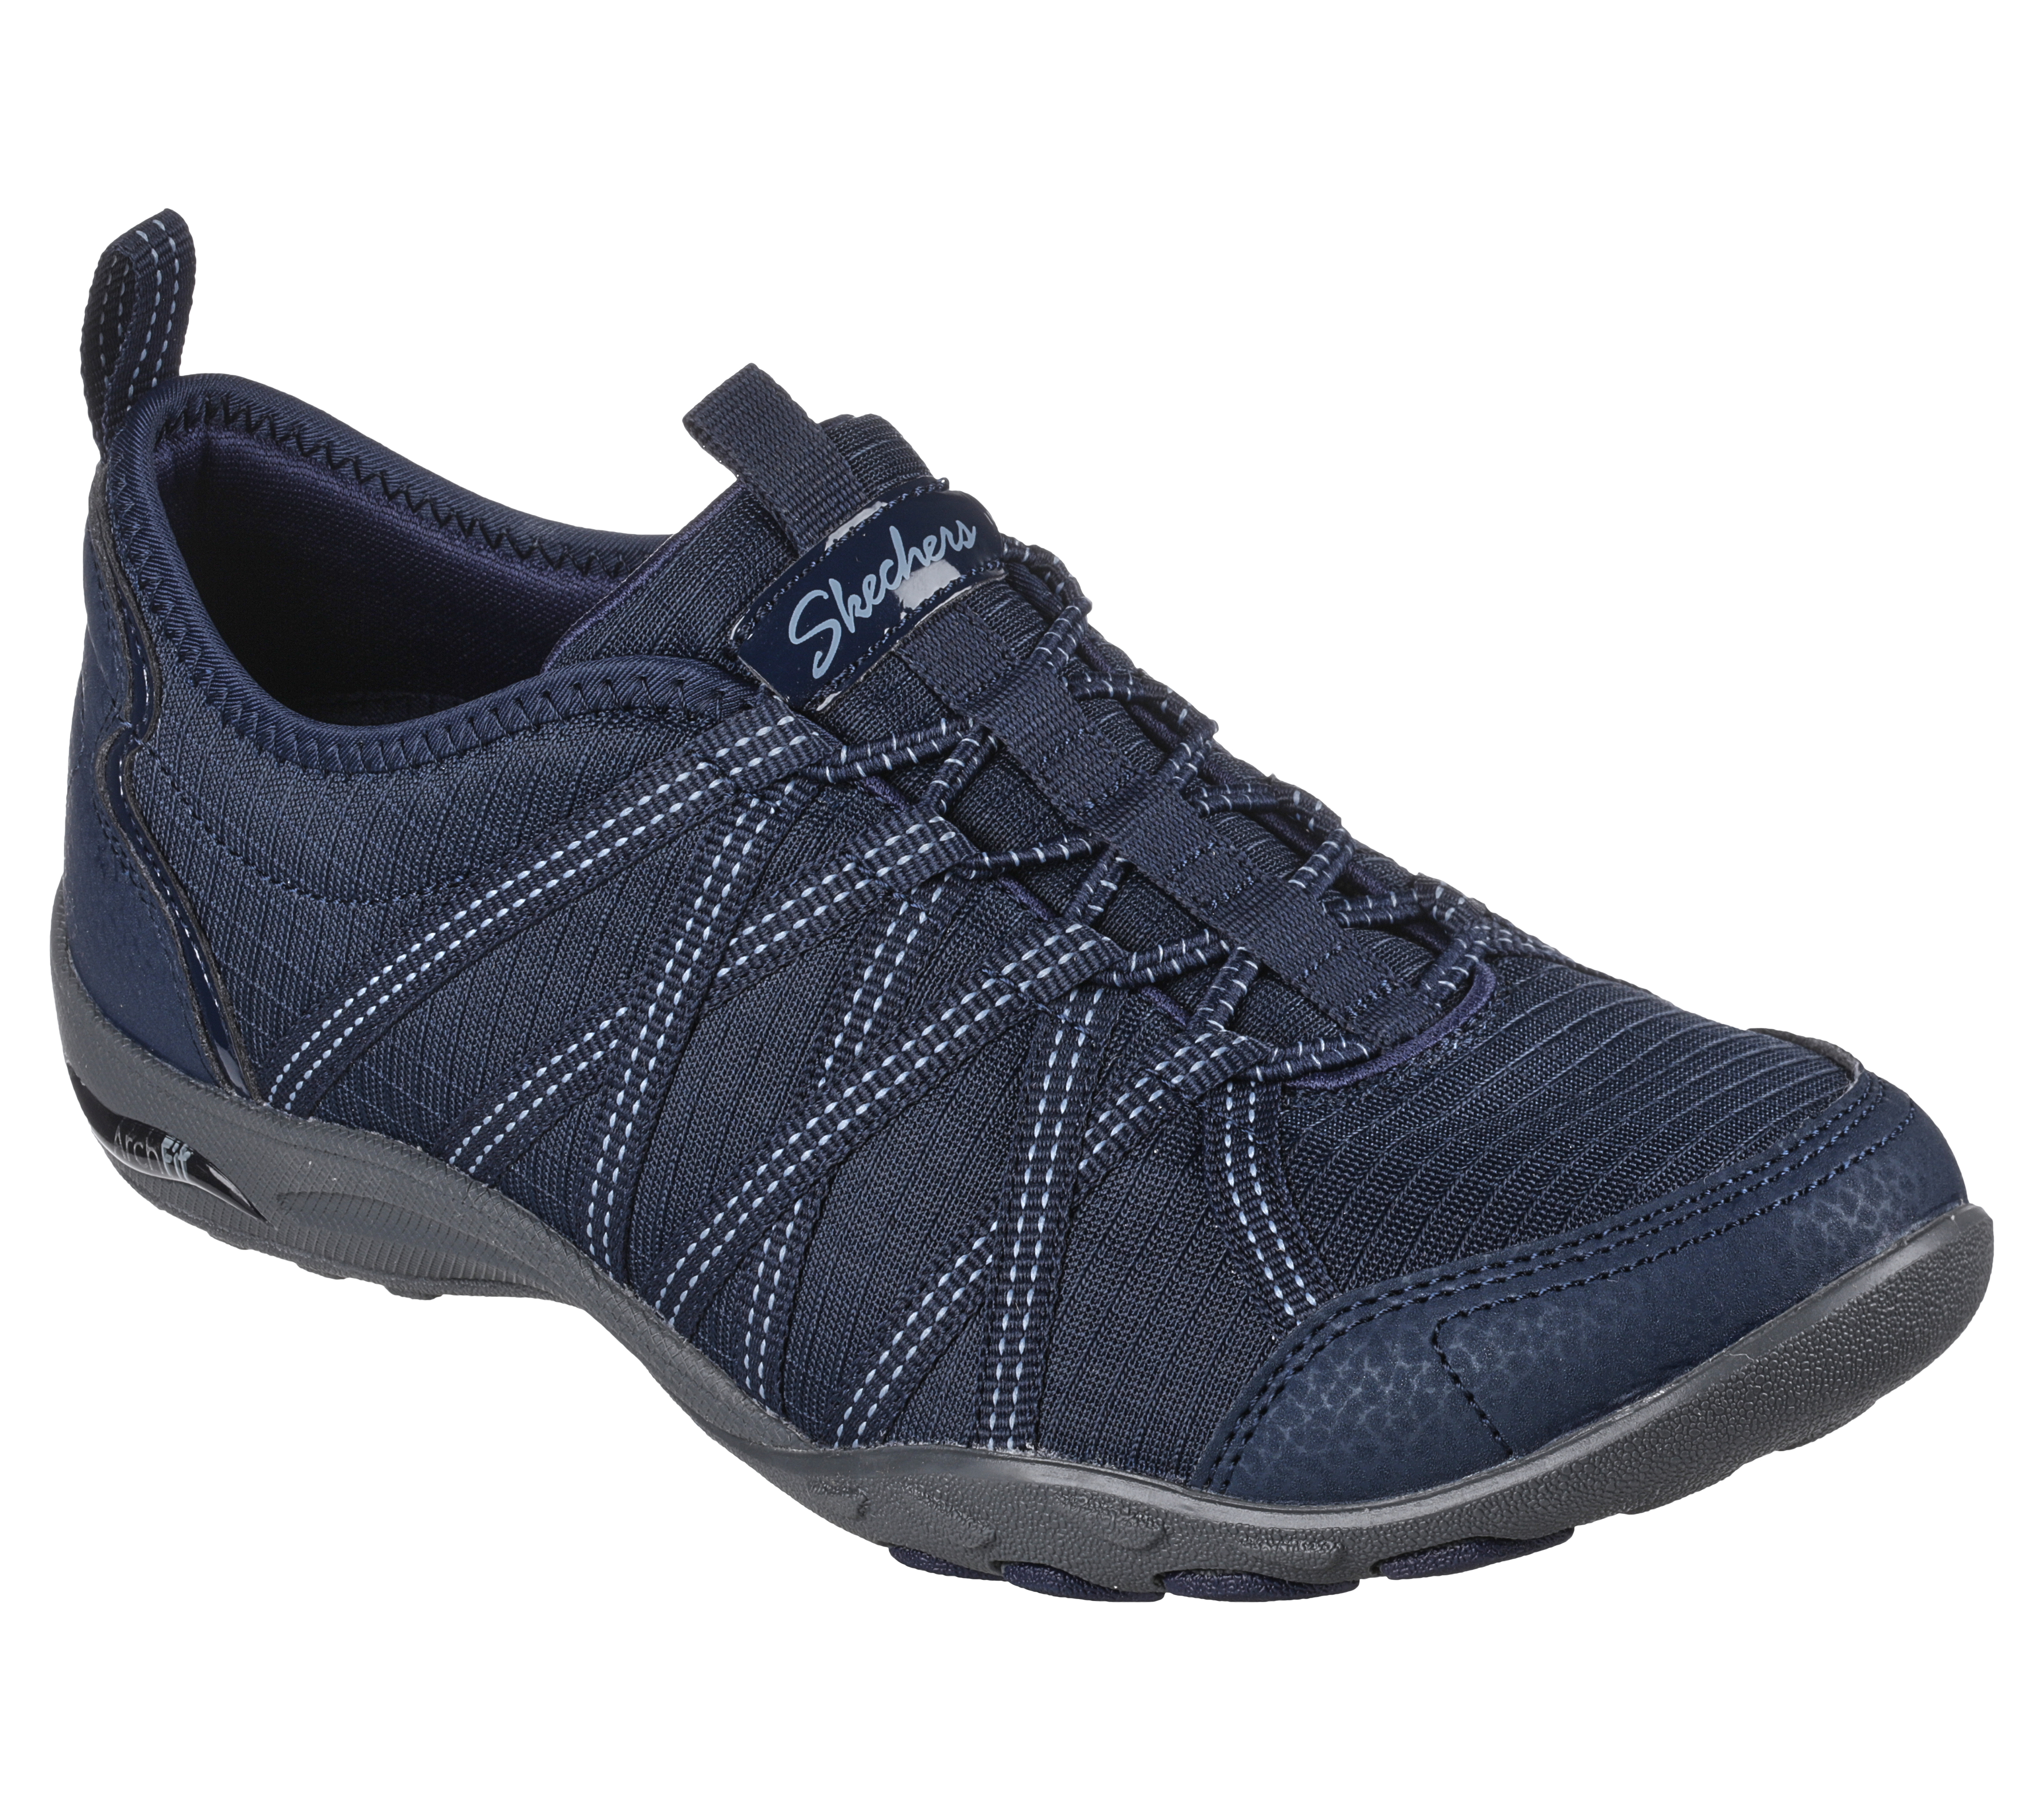 Foto de producto: Relaxed fit: arch fit comfy - paradise